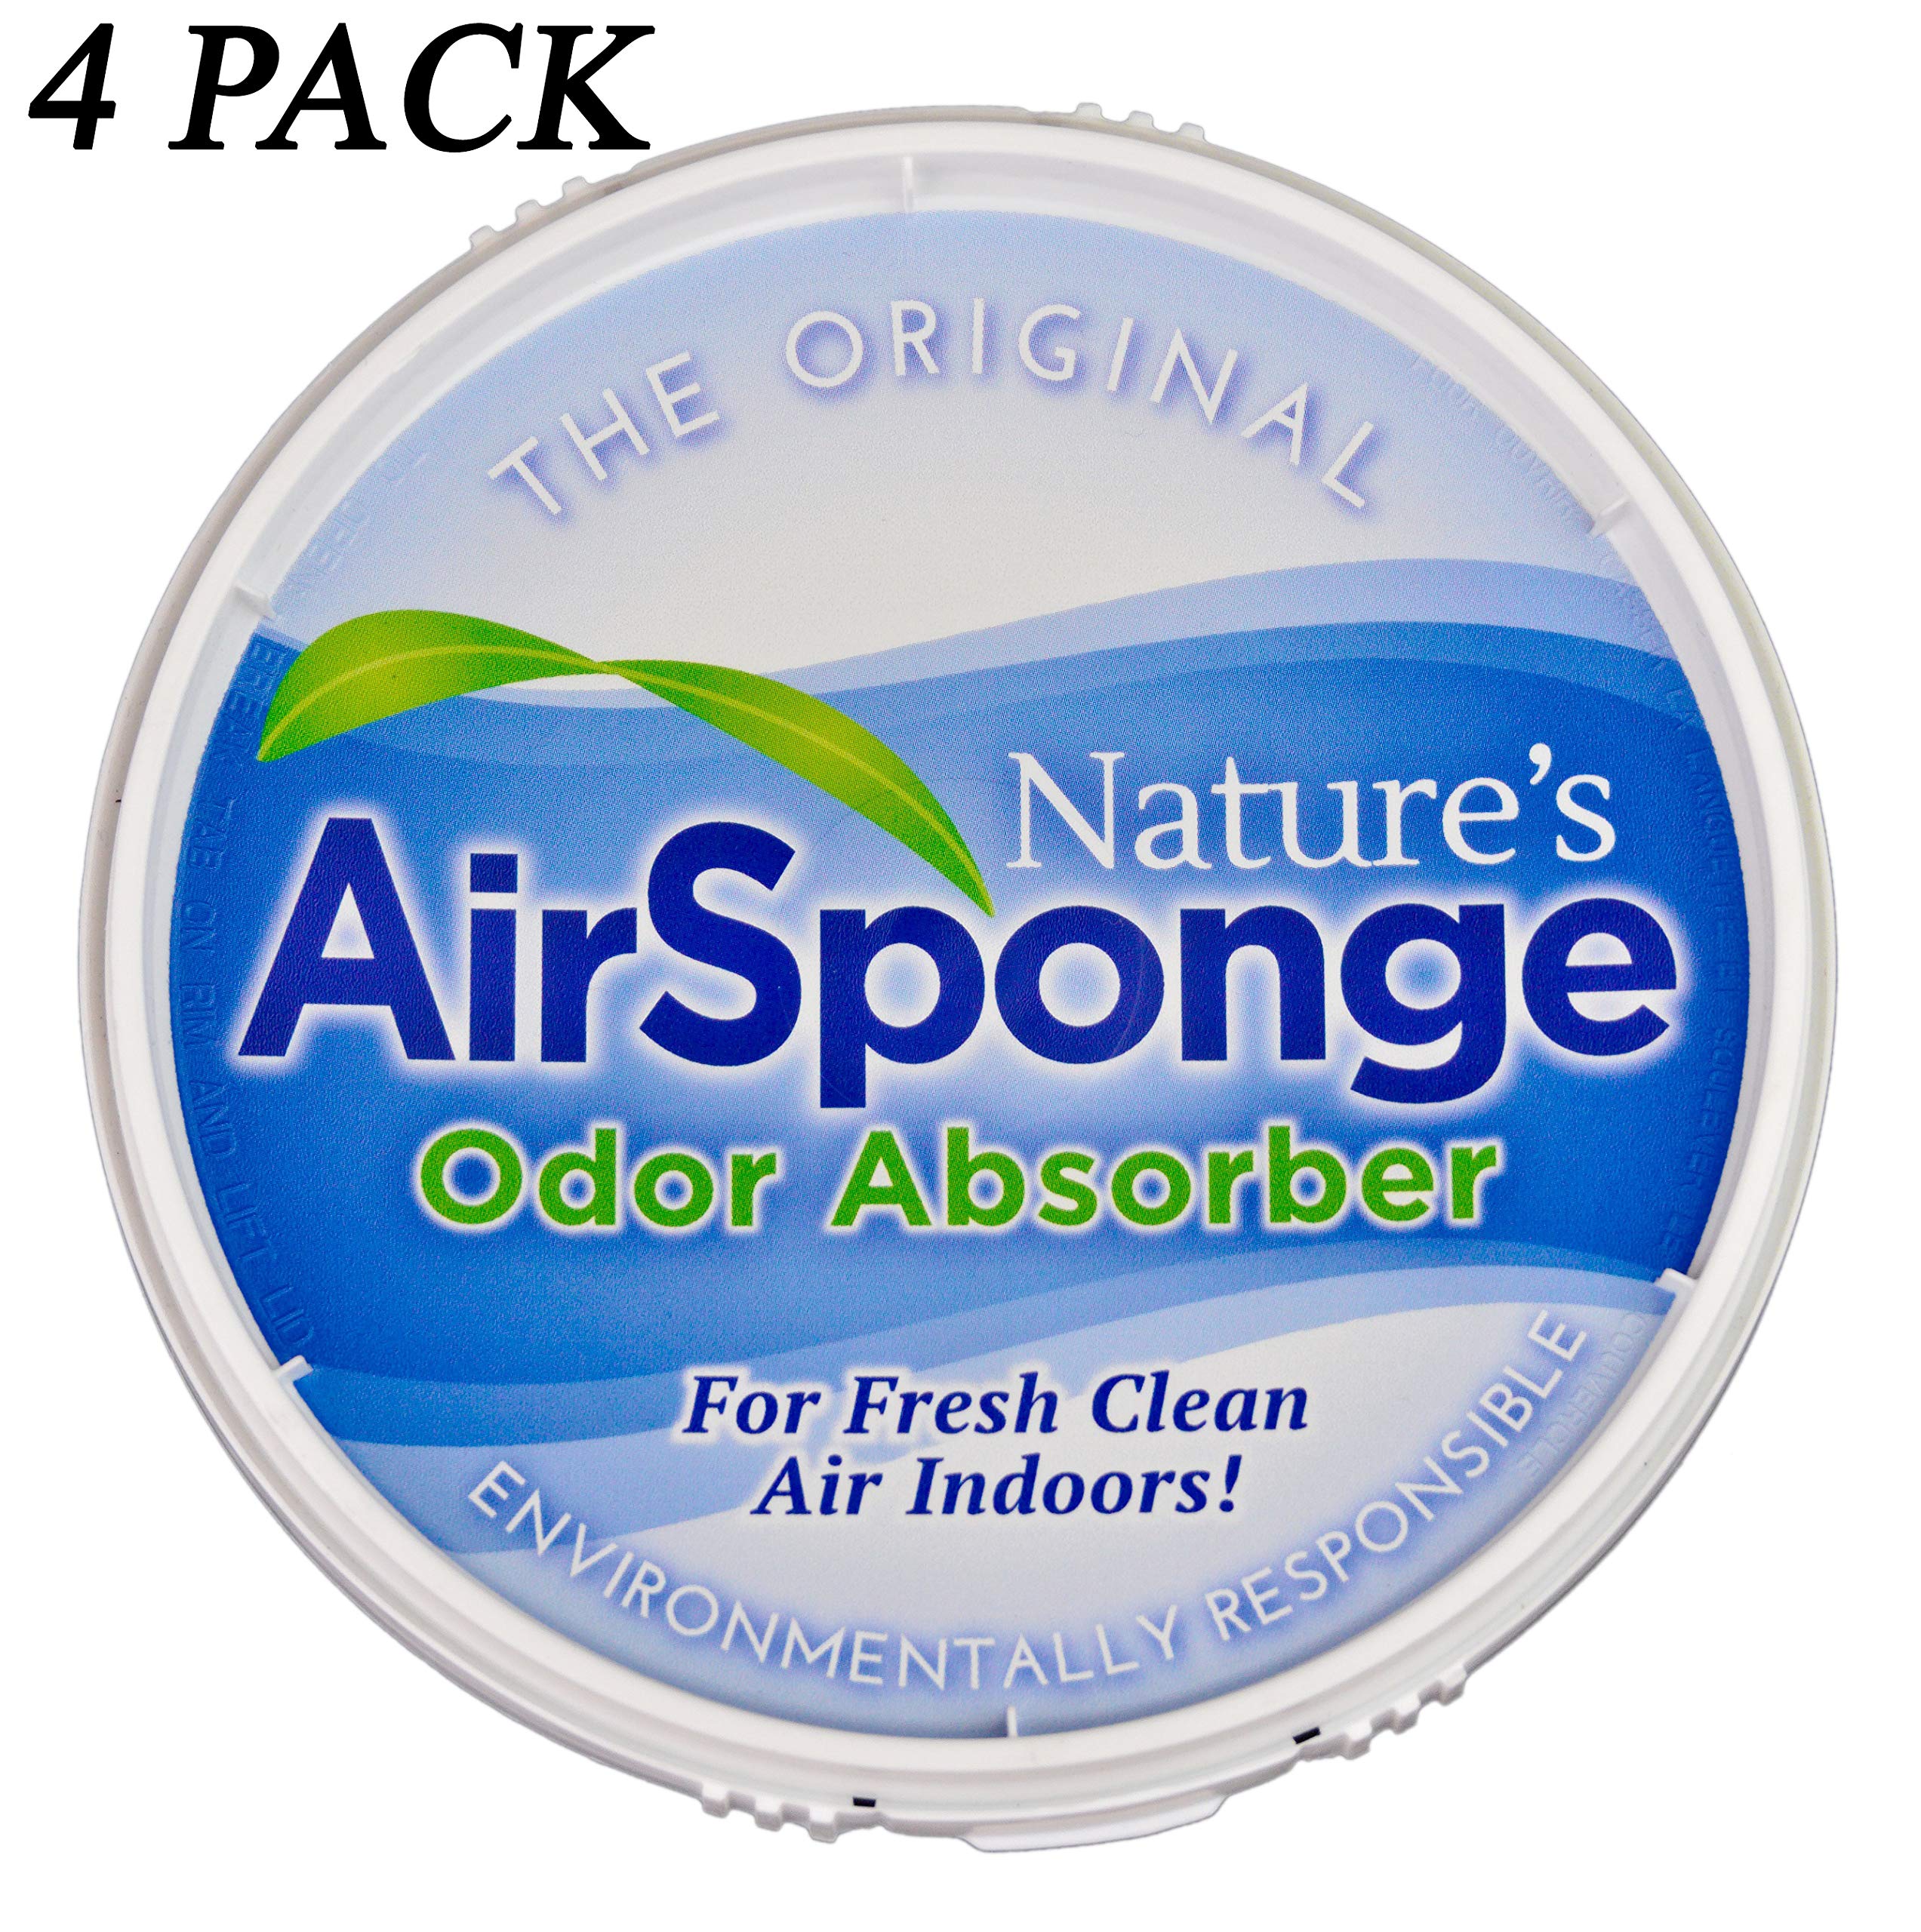 DELTA Nature's Air Sponge Odor Absorber Unscented Plastic Tub 1/2 Lb, 8 Ounce (Pack of 4), 32 Ounce